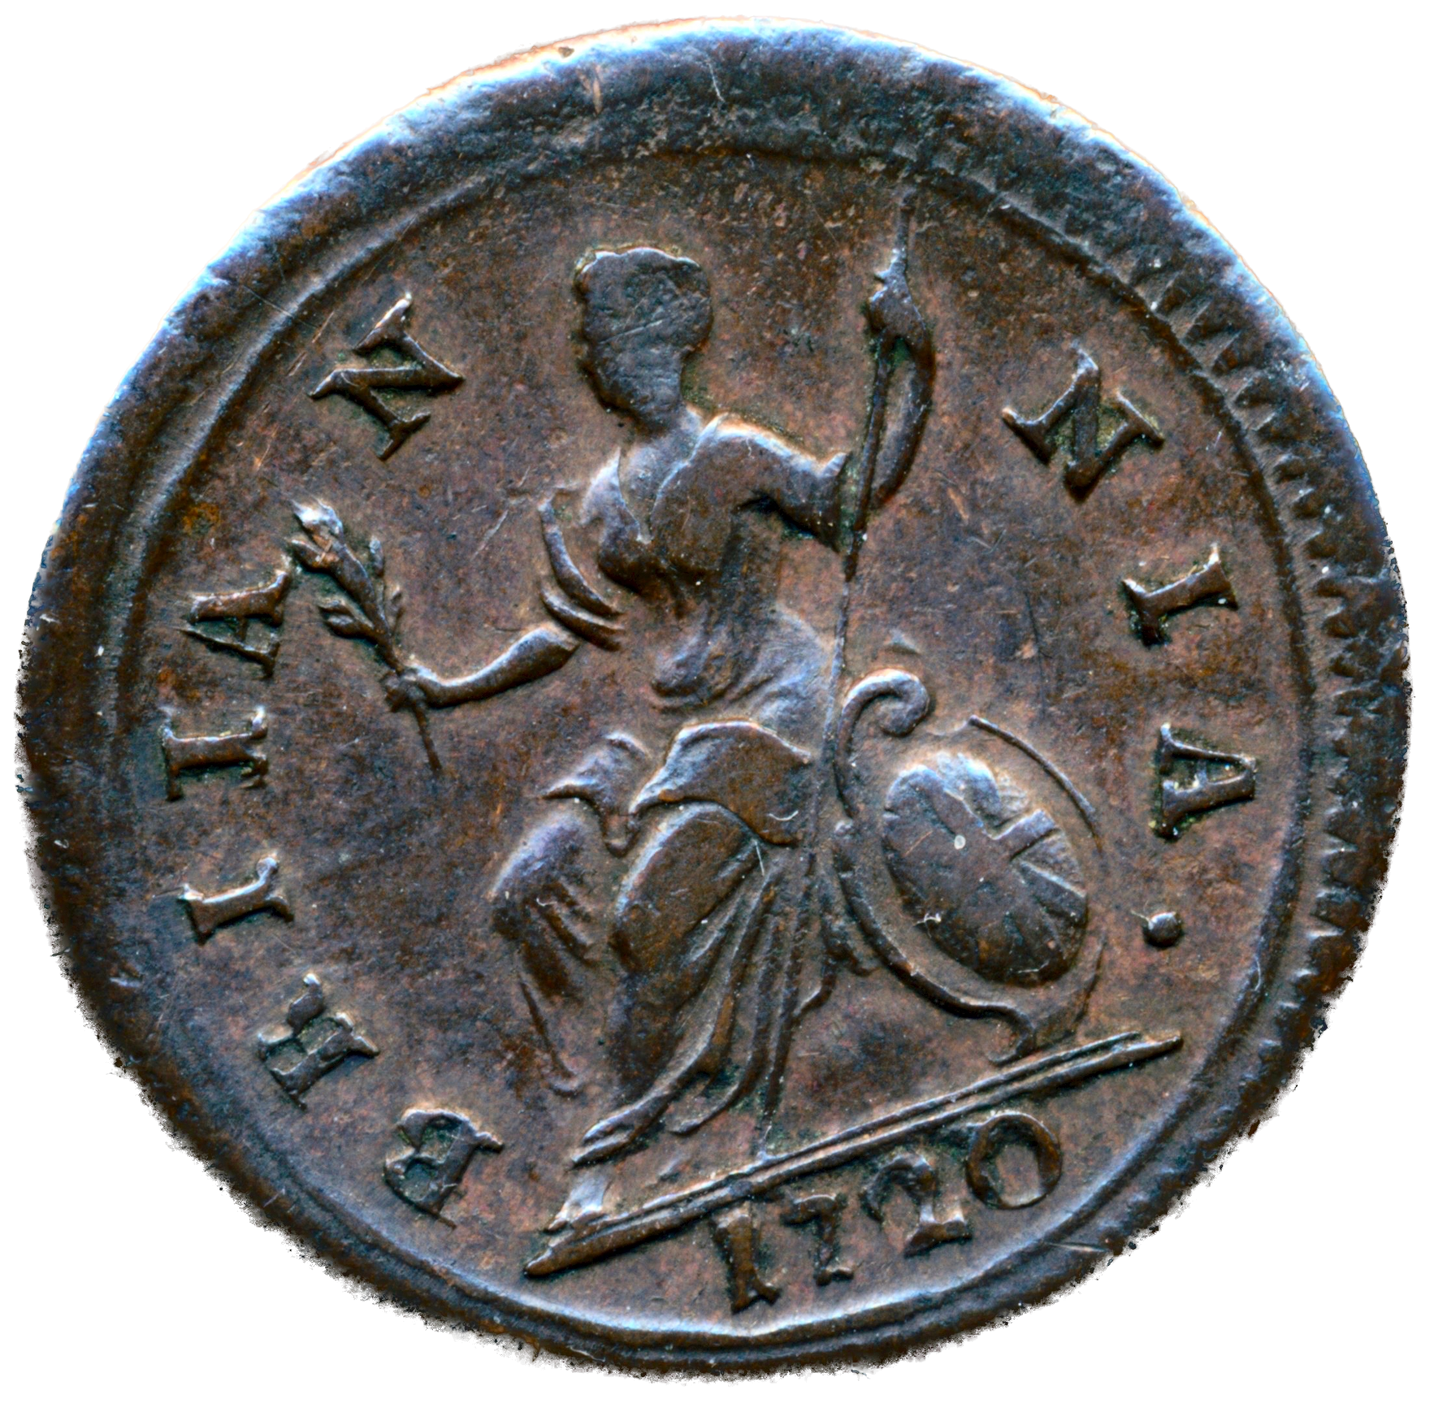 1720 Farthing S3662 BMC 818 Small obv letters Large 0 NEF